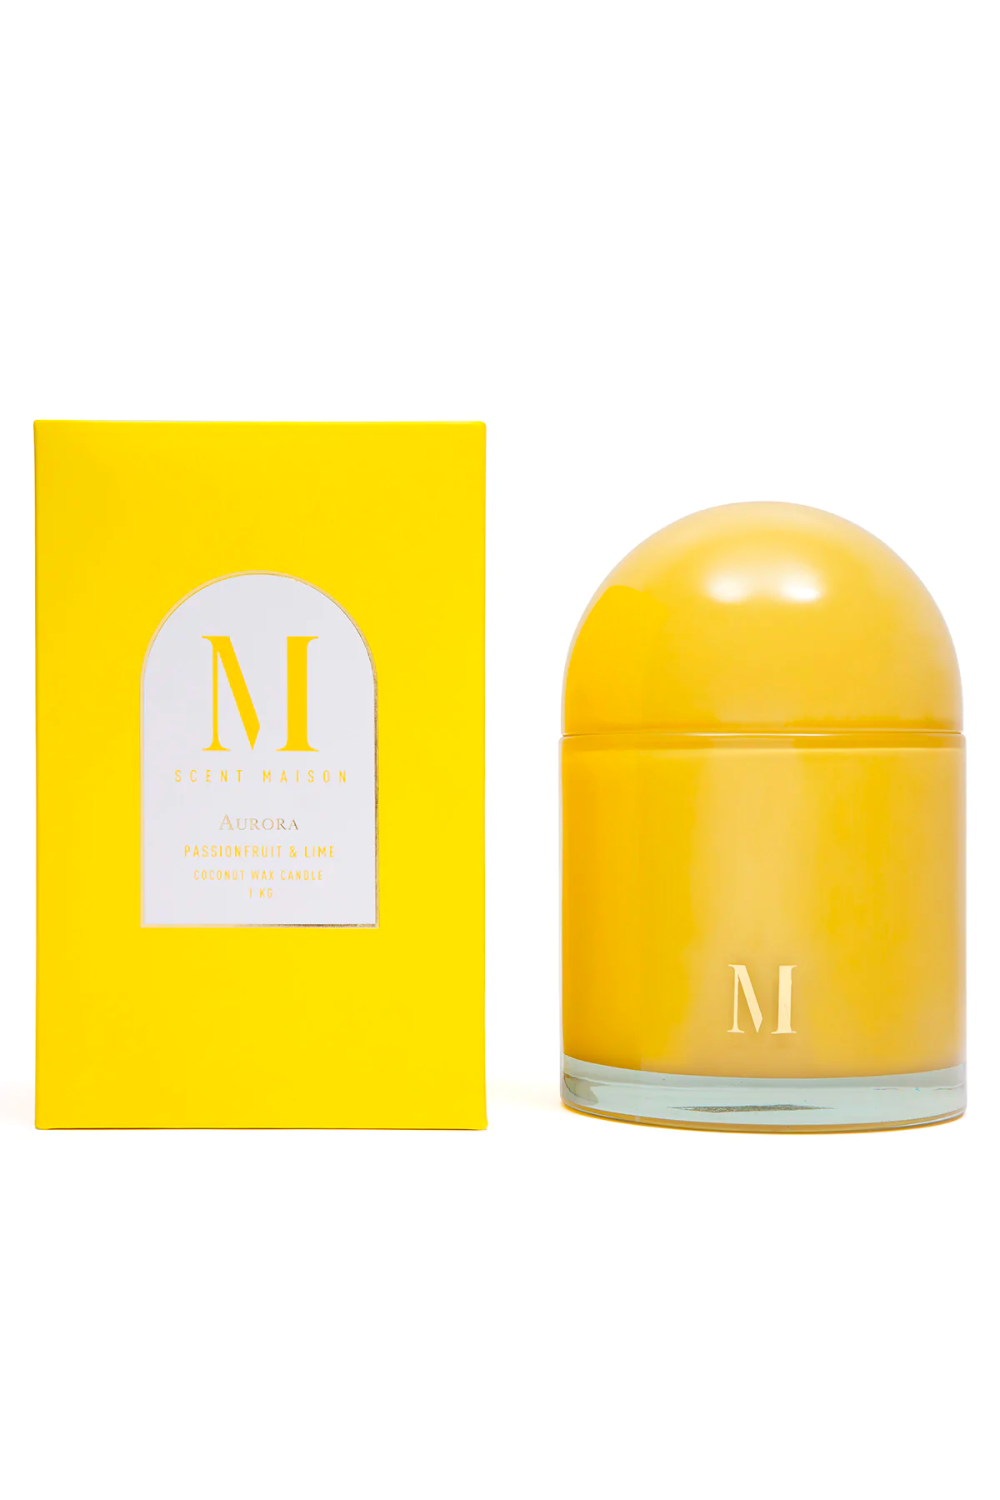 LARGE SCENT MAISON AURORA - PASSIONFRUIT AND LIME 1000G CANDLE